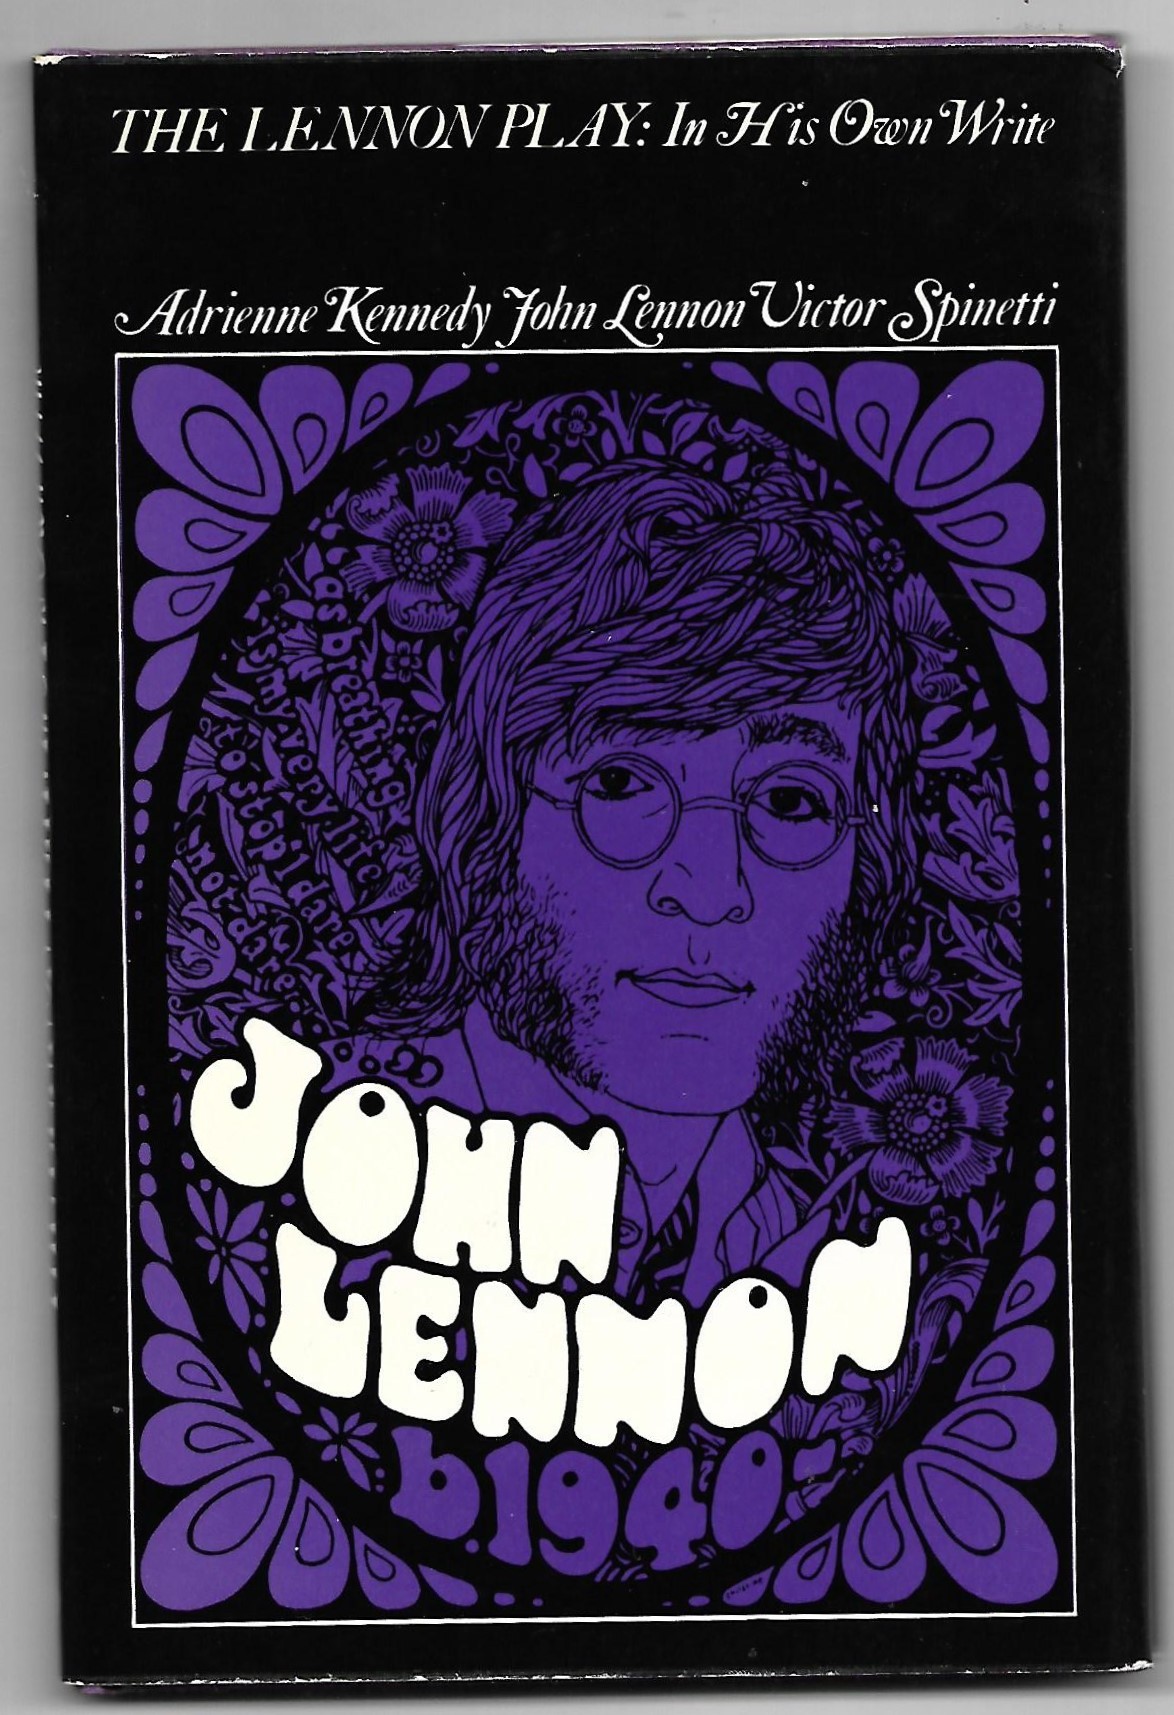 John Lennon The Play In His Own Write first published 1968 by Jonathan Cape